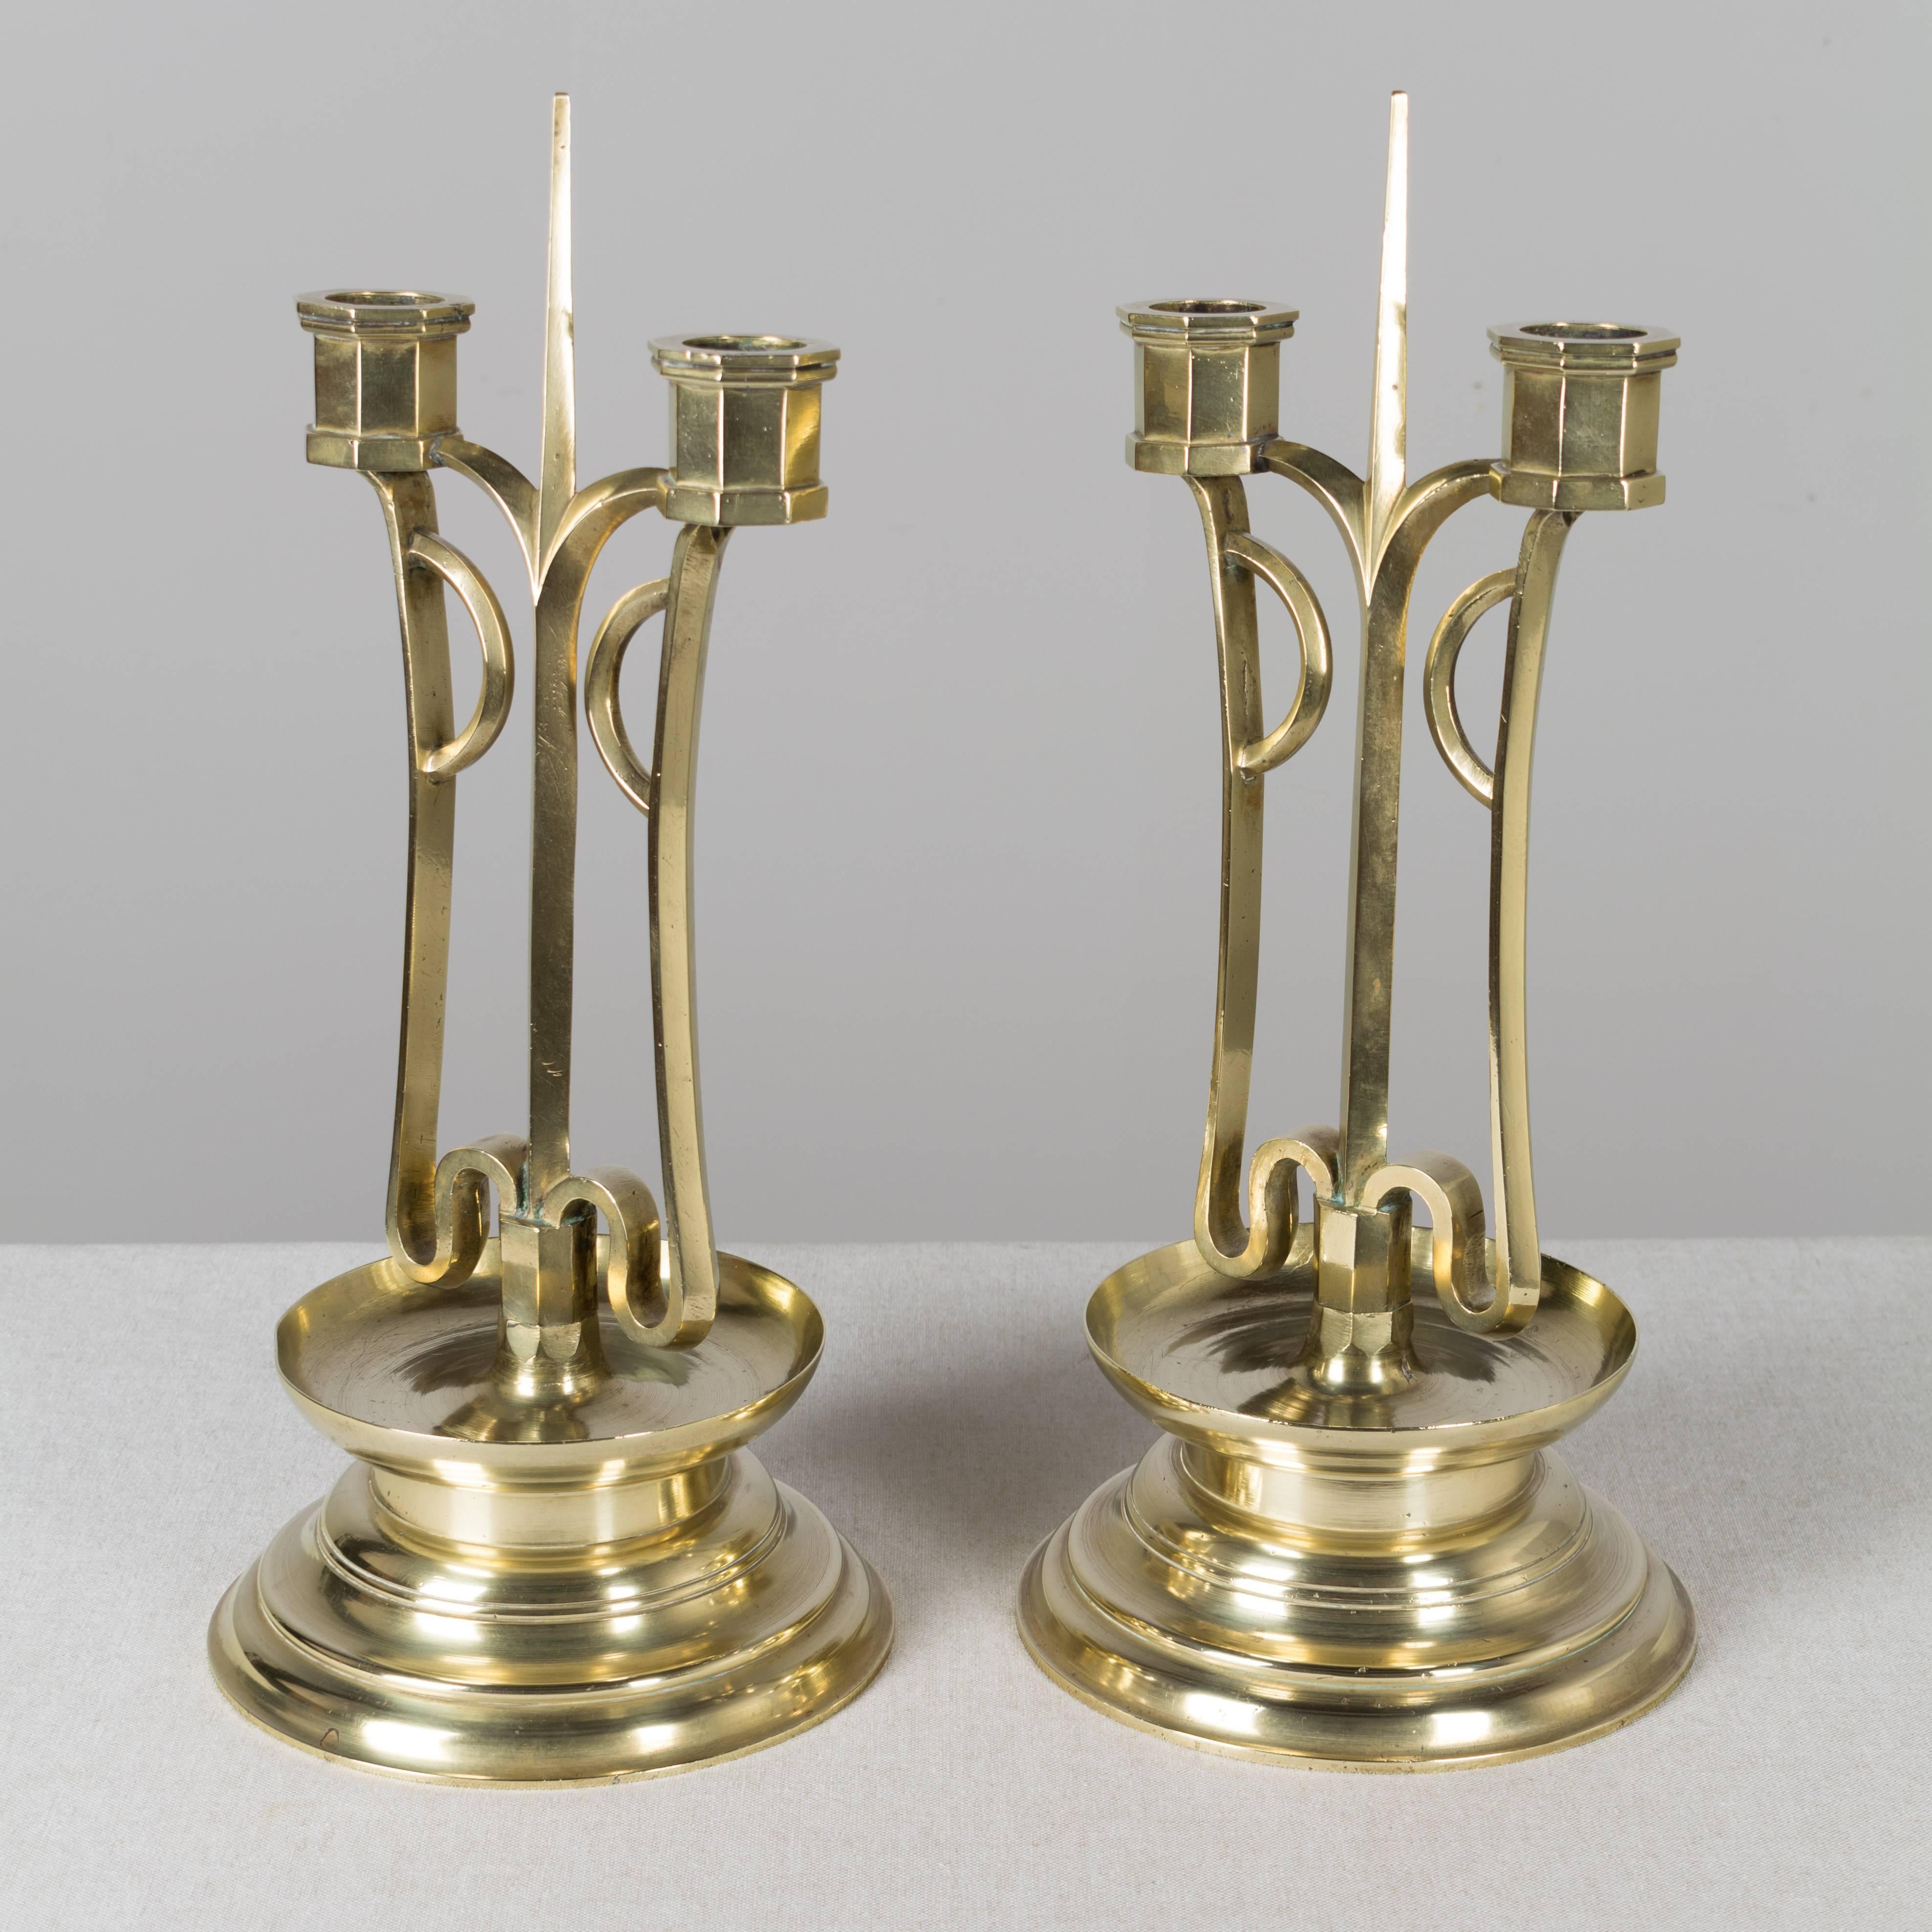 Pair of Austrian Brass Candelabra For Sale at 1stDibs